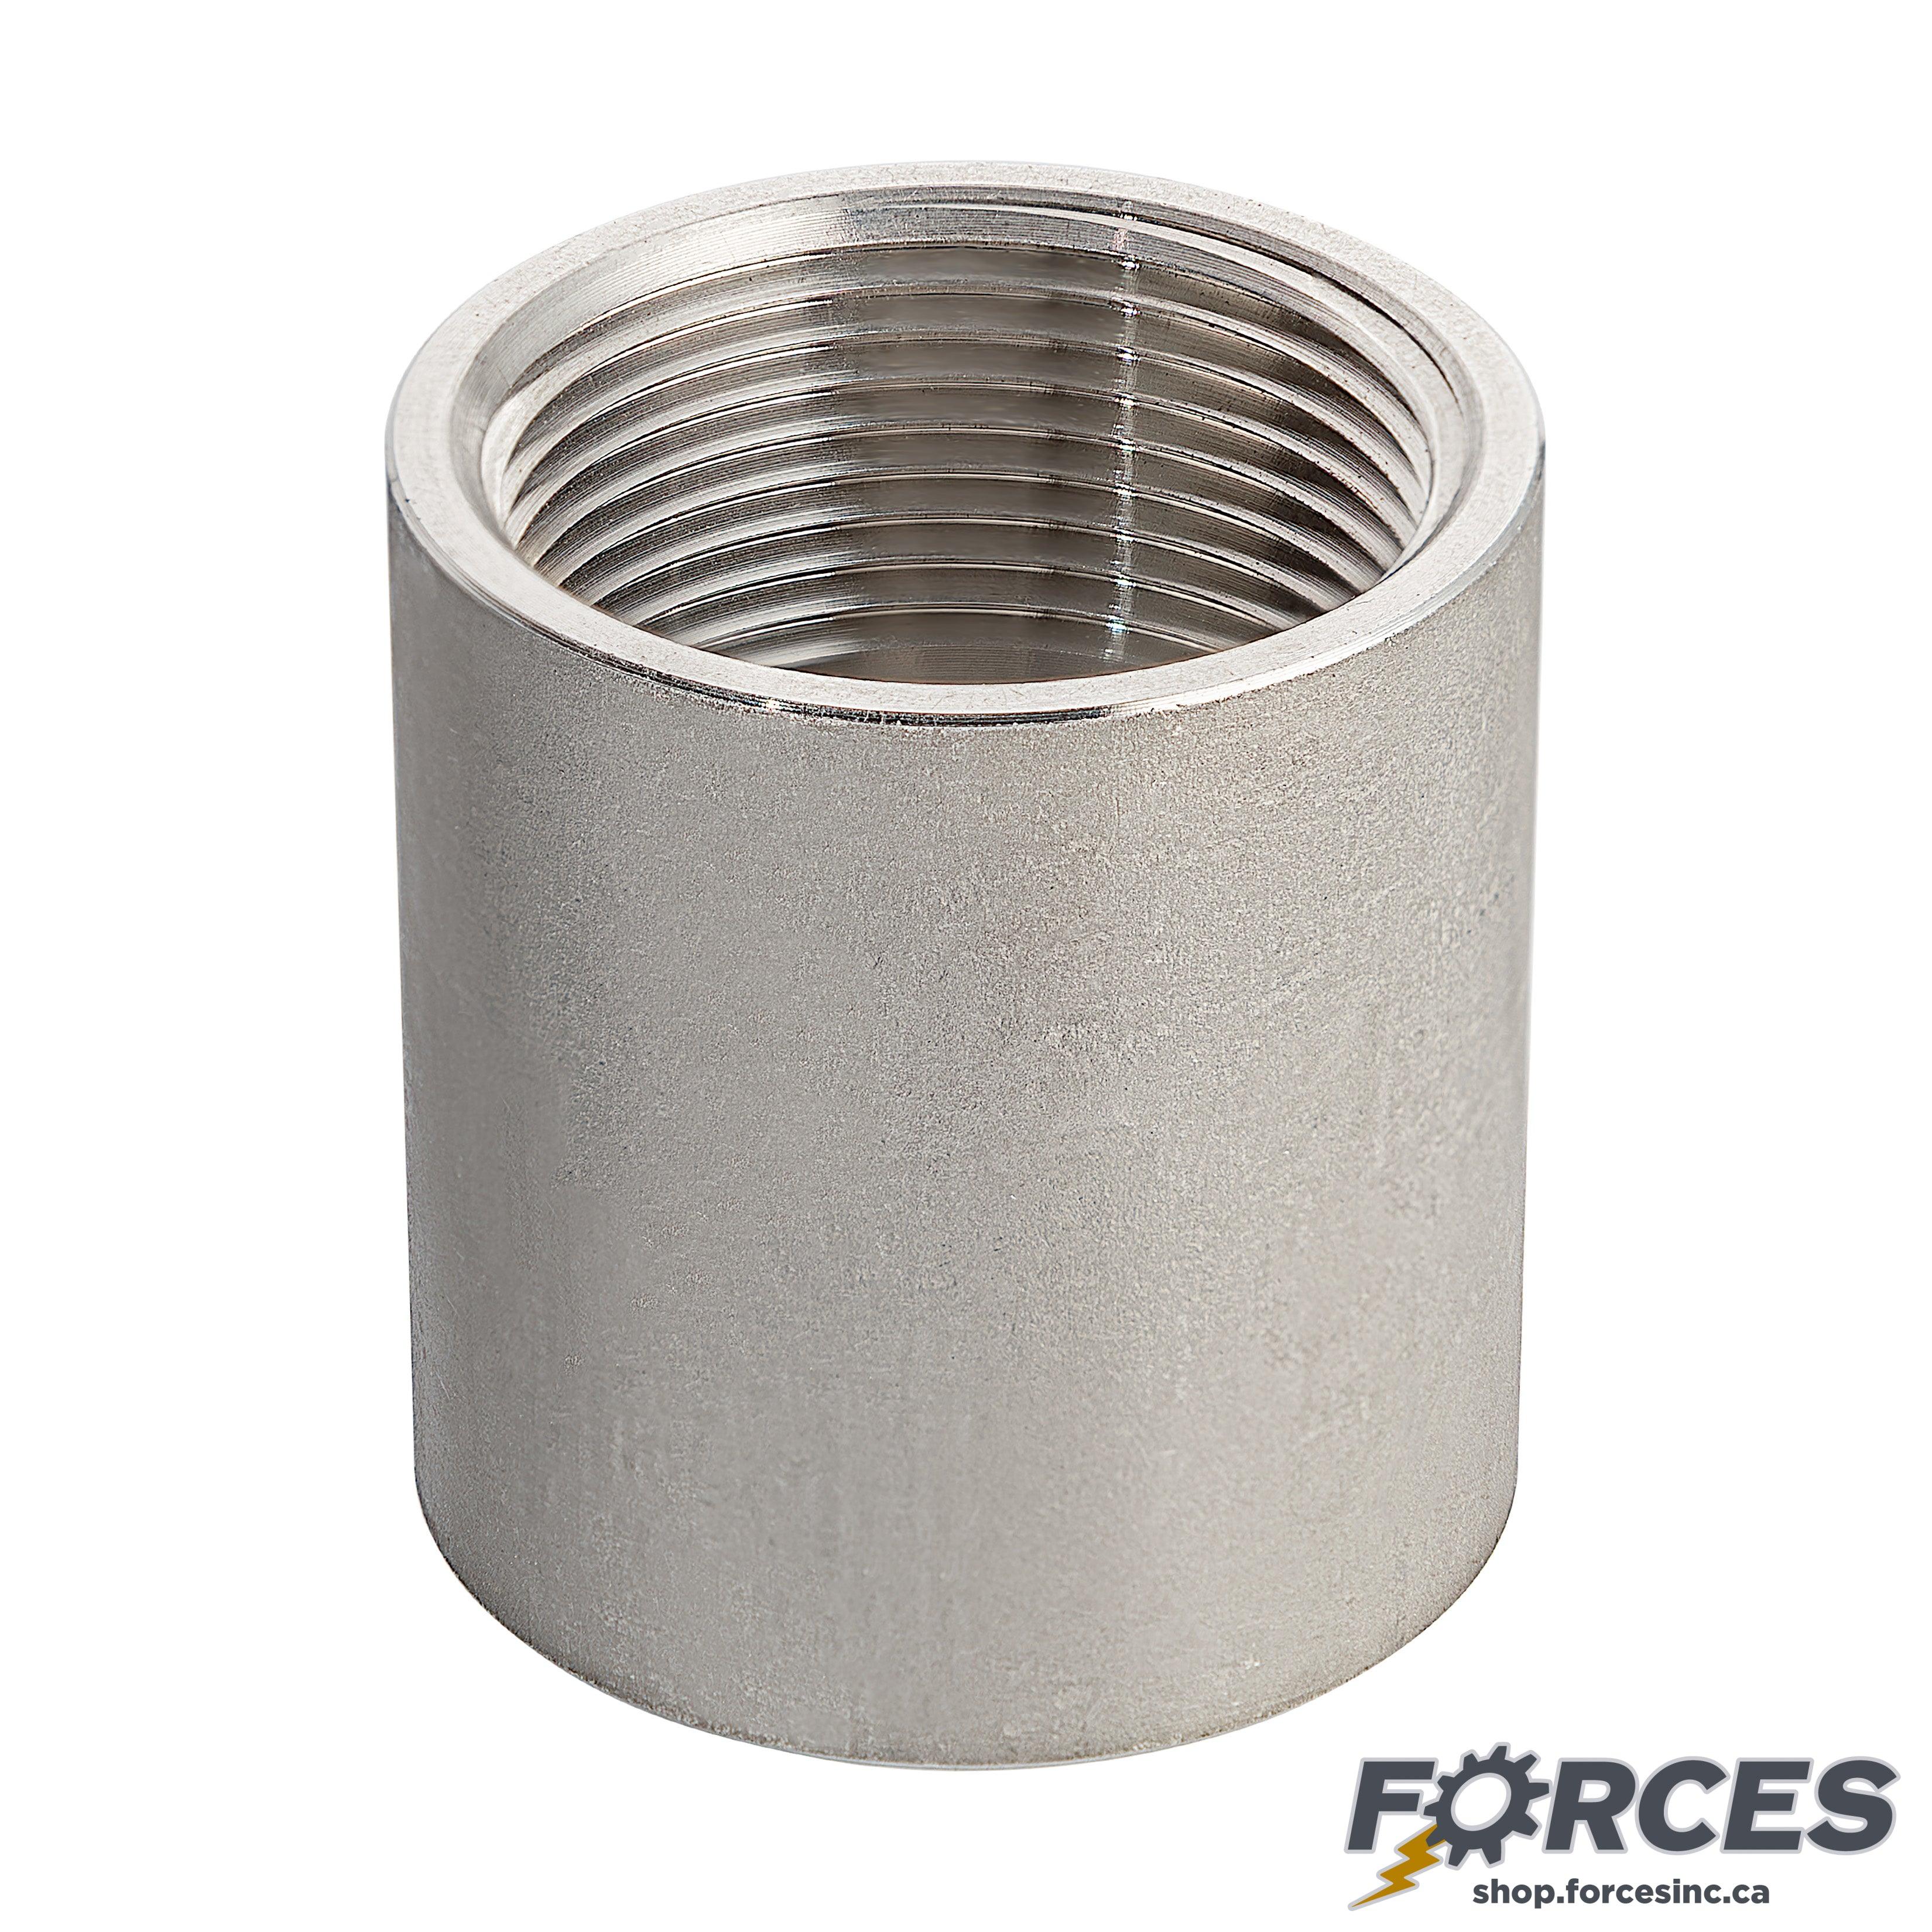 2-1/2" Coupling NPT #150 - Stainless Steel 316 - Forces Inc